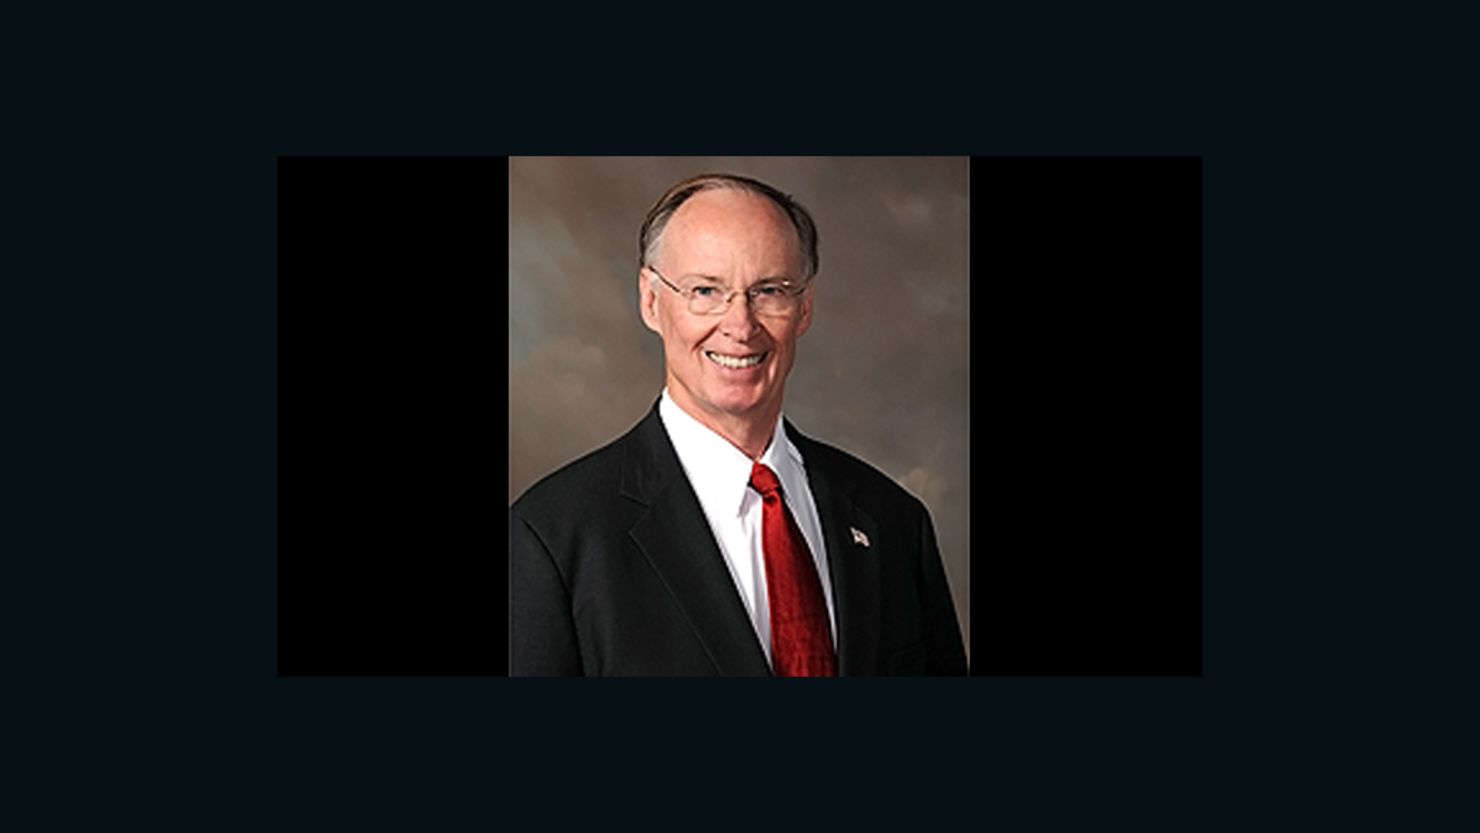 Alabama Gov. Robert Bentley responded to the ruling by saying, "I will always fight for the rights of the unborn."